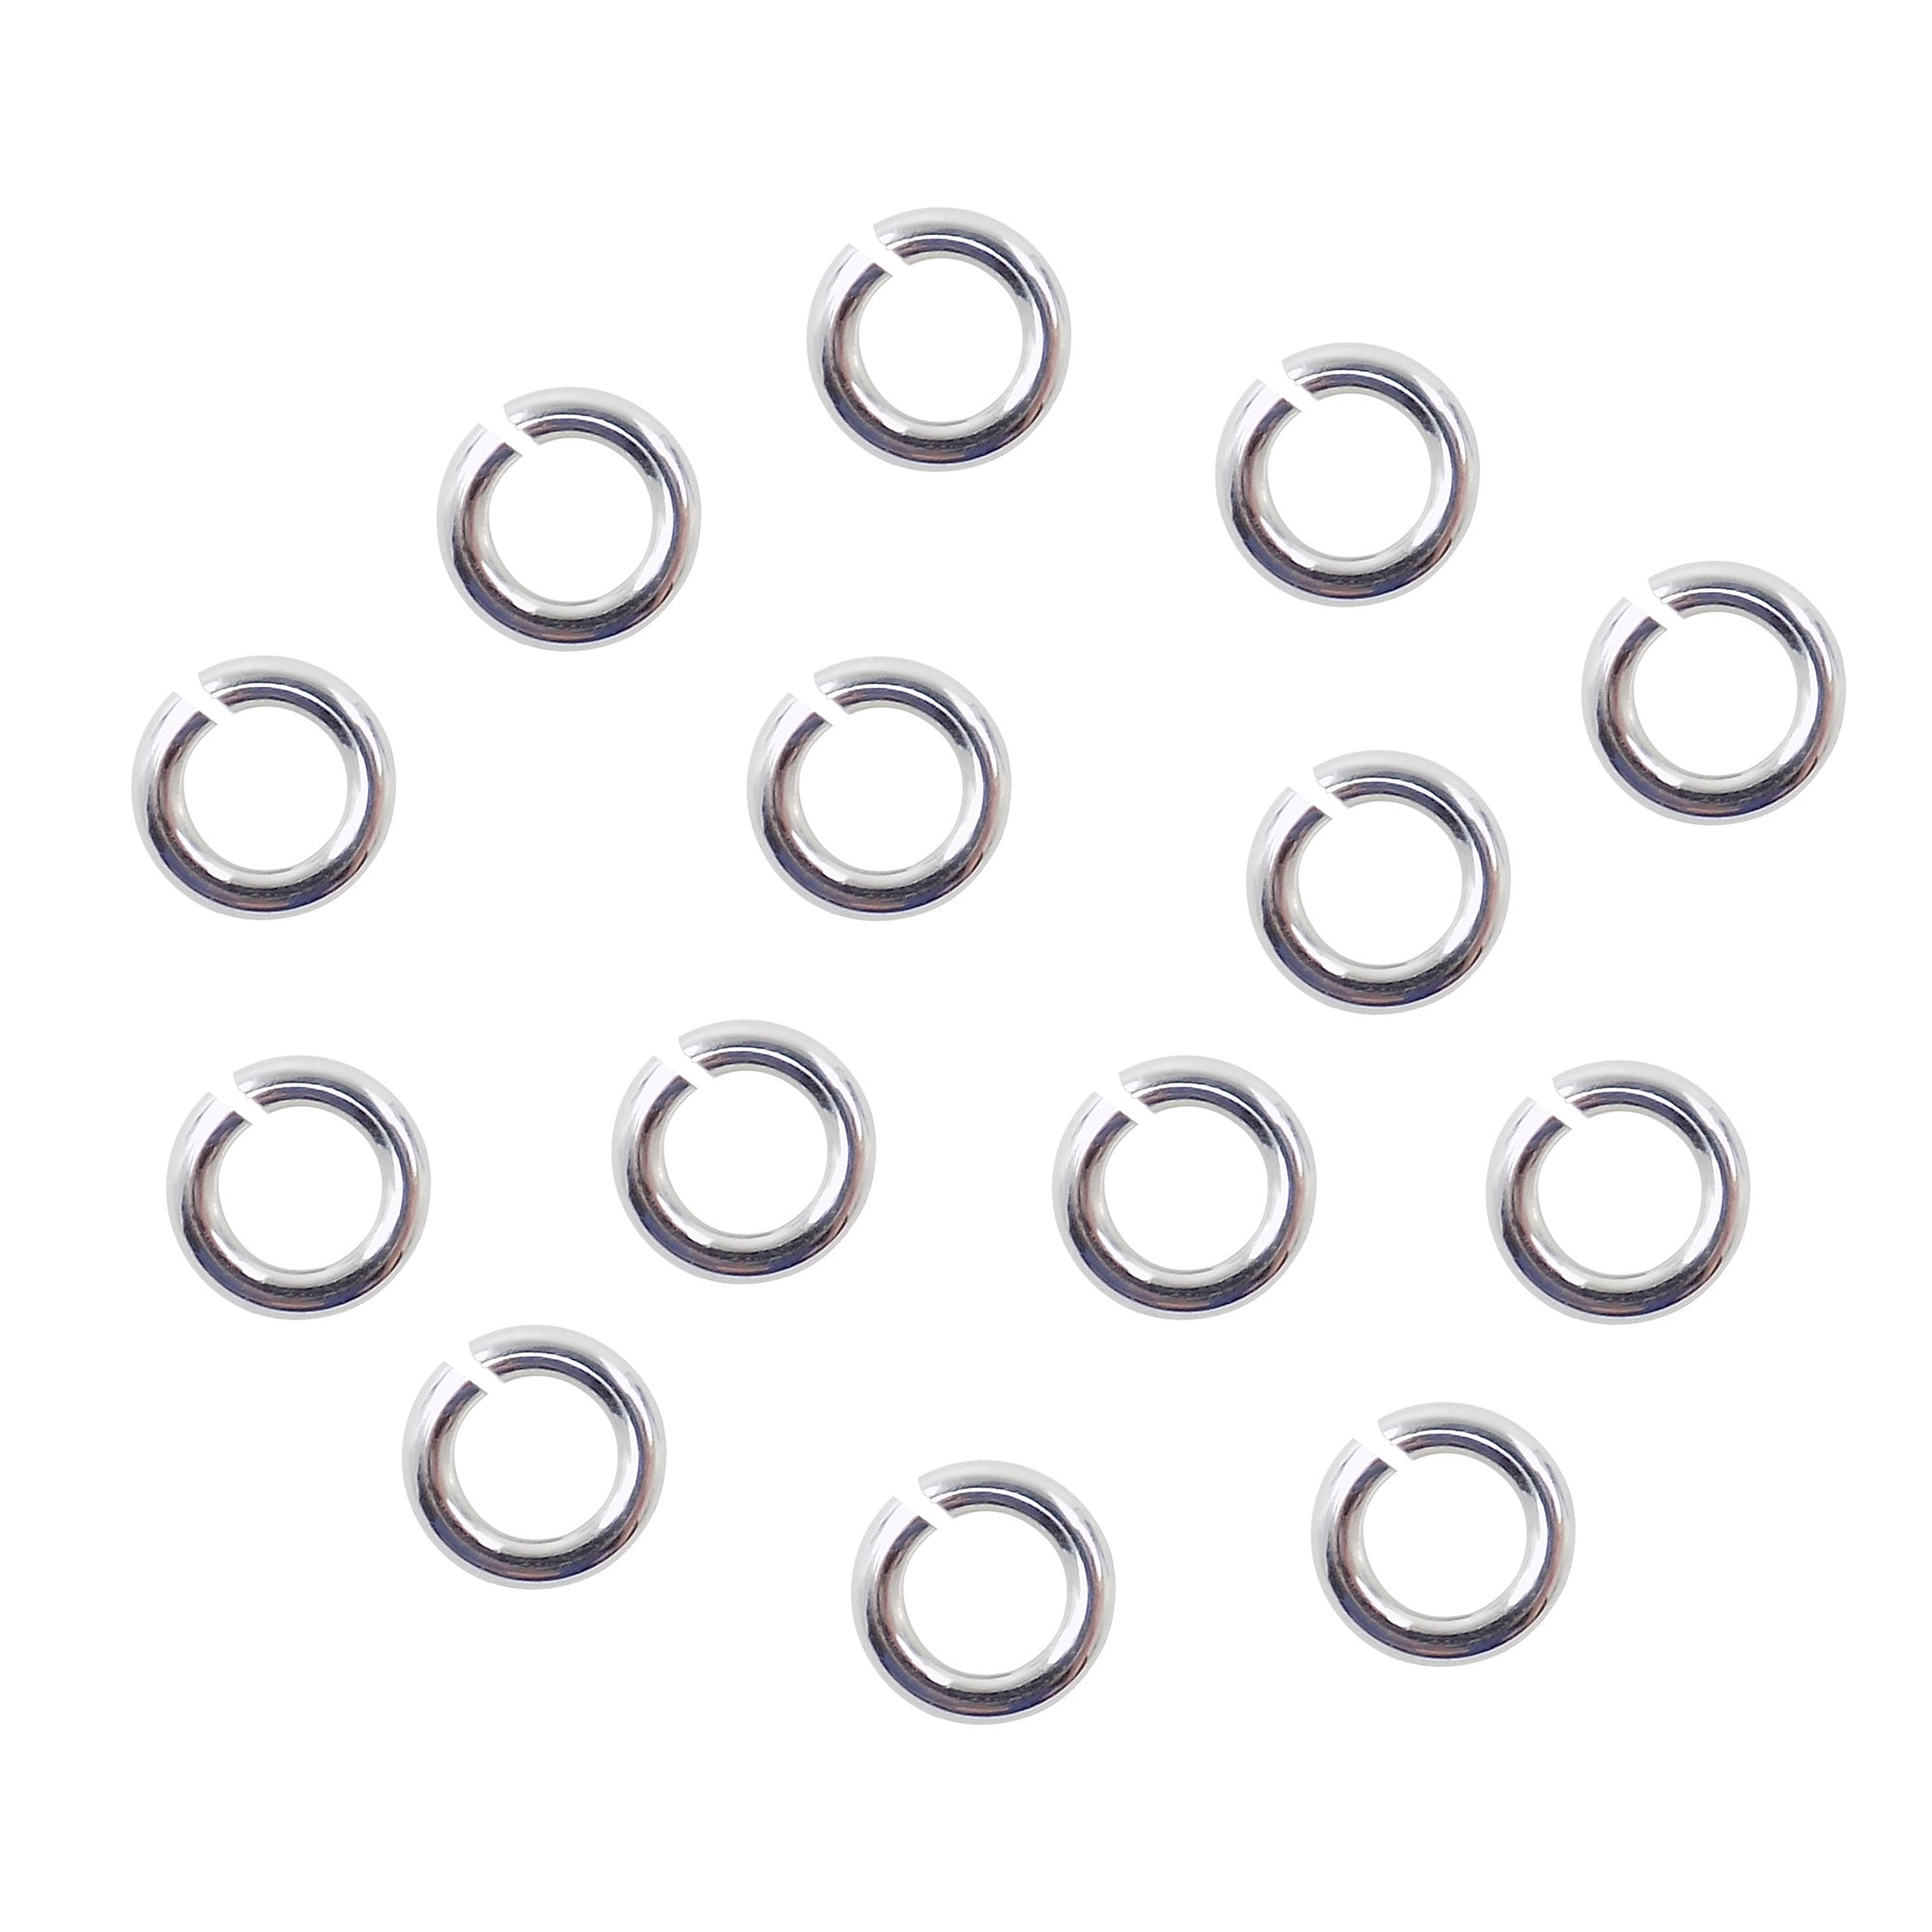 Wholesale Jewelry Supplies - 25 pcs Sterling Silver 5mm 22 gauge